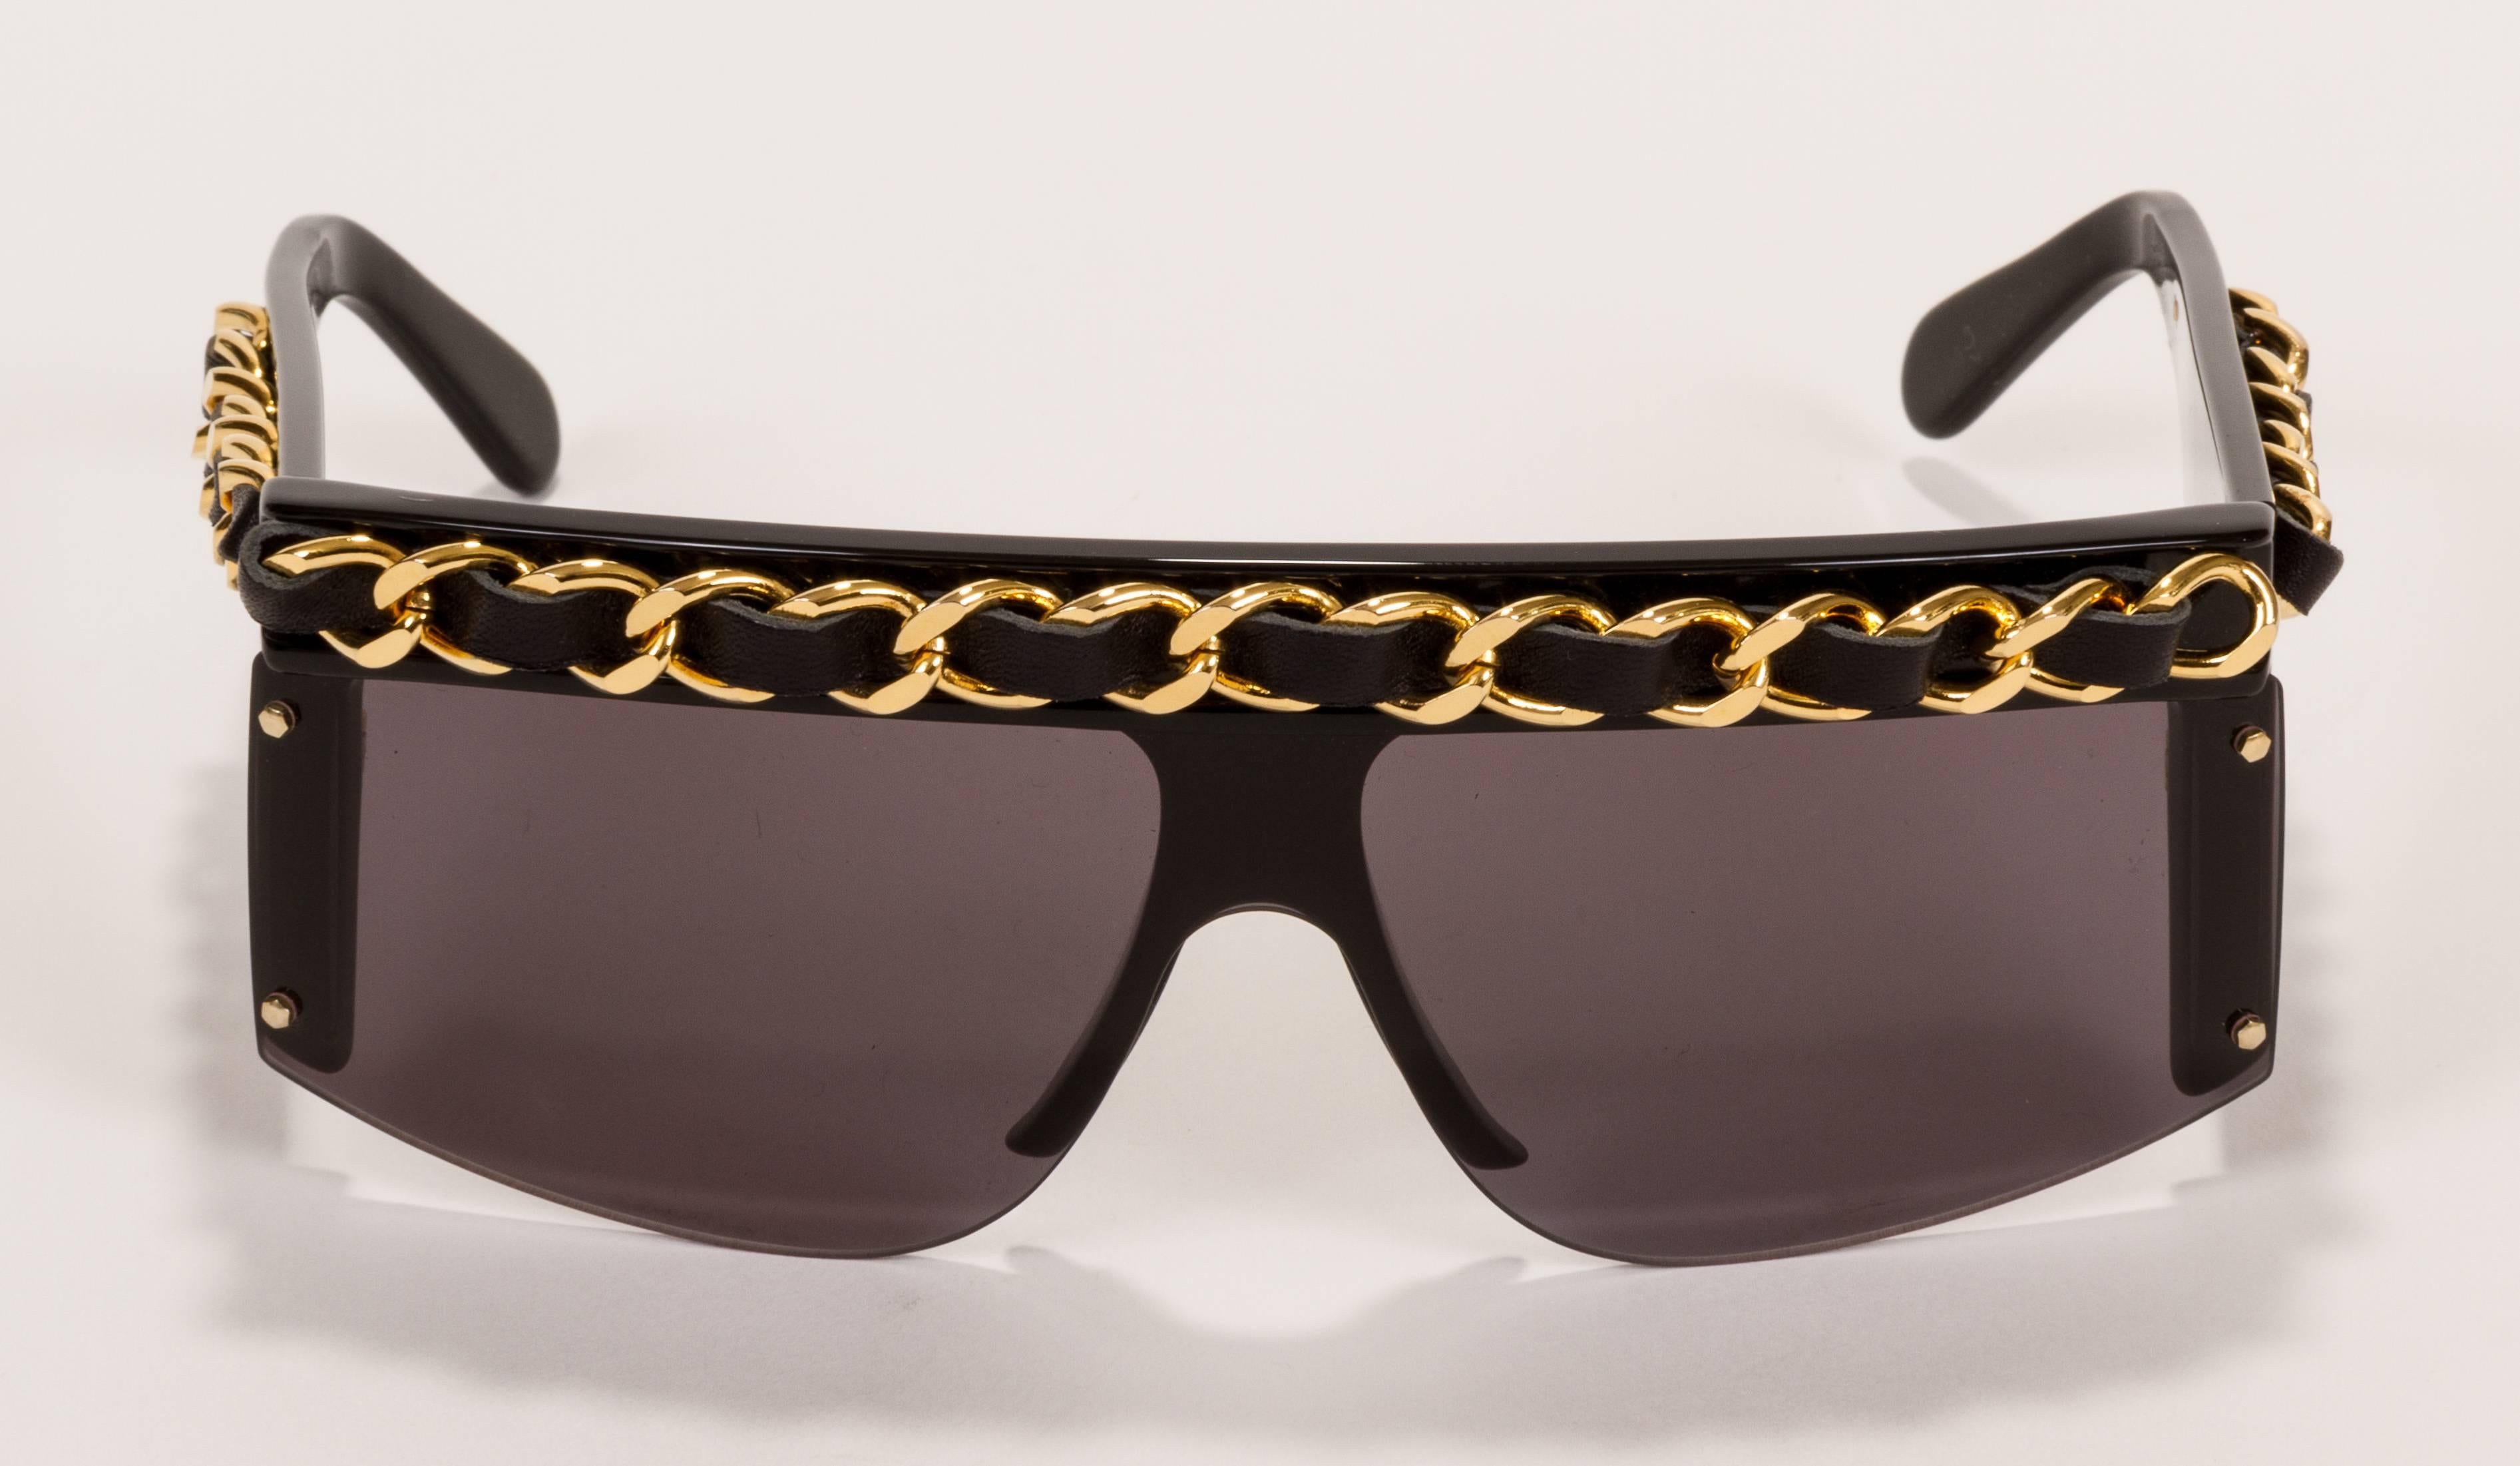 1980s Chanel black oversize celluloid sunglasses with gold-plated chain interlaced with black lambskin on top and sides. Comes with Chanel leather case and box. Minor scratches on frame and lenses.